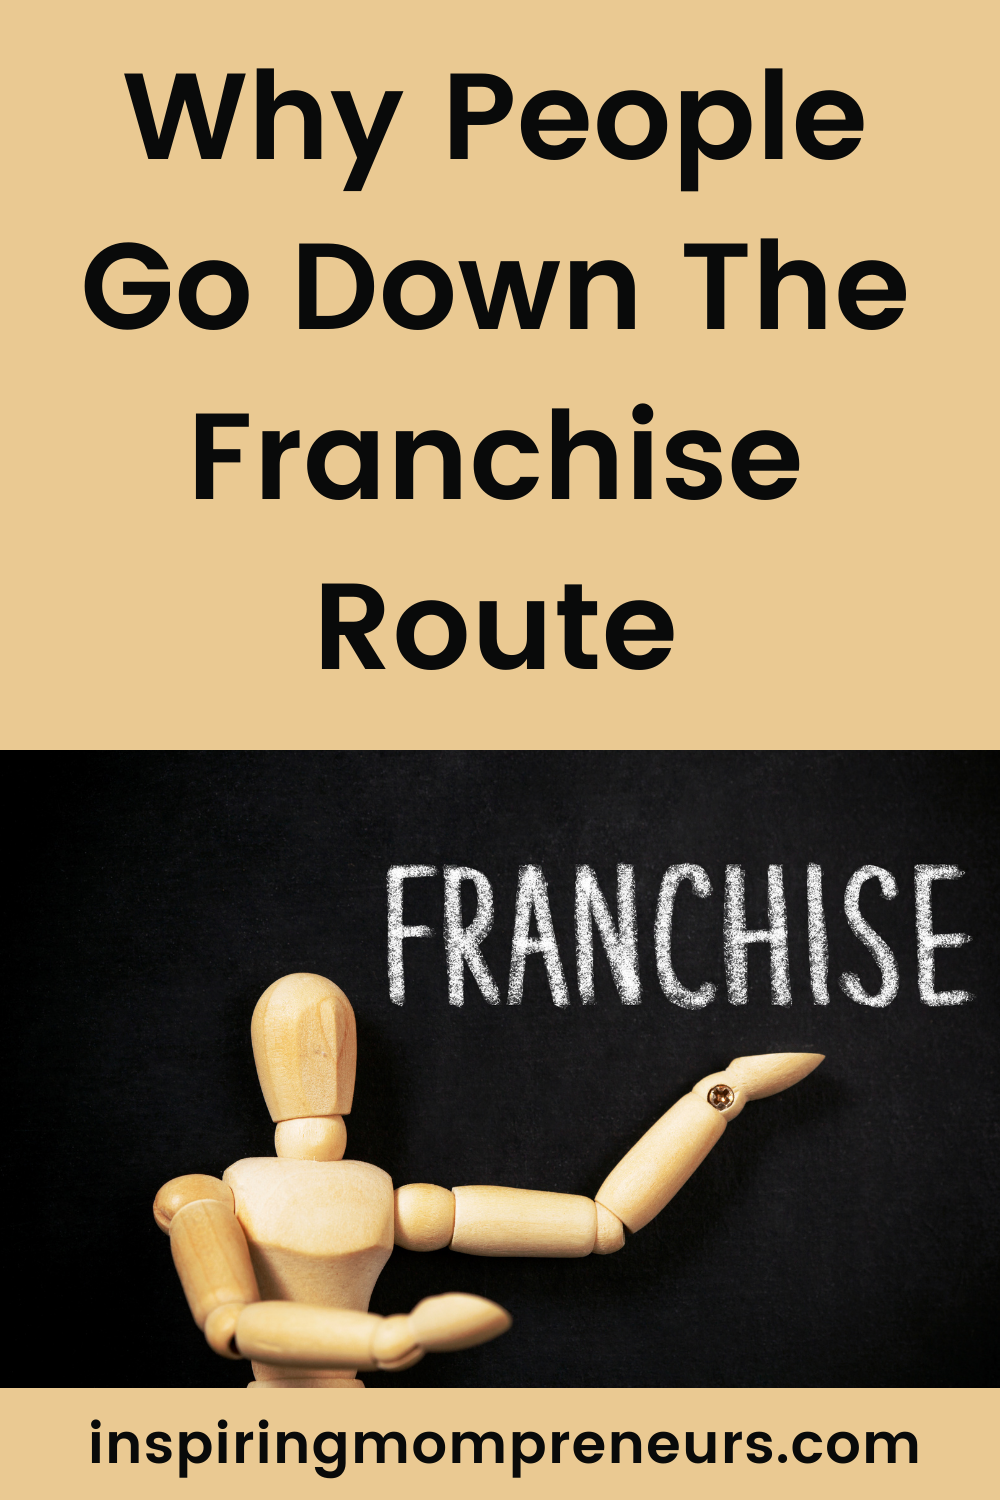 Franchising helps people with no business background to dip their toes in the world of commerce. Here a few more reasons people go down the franchise route.